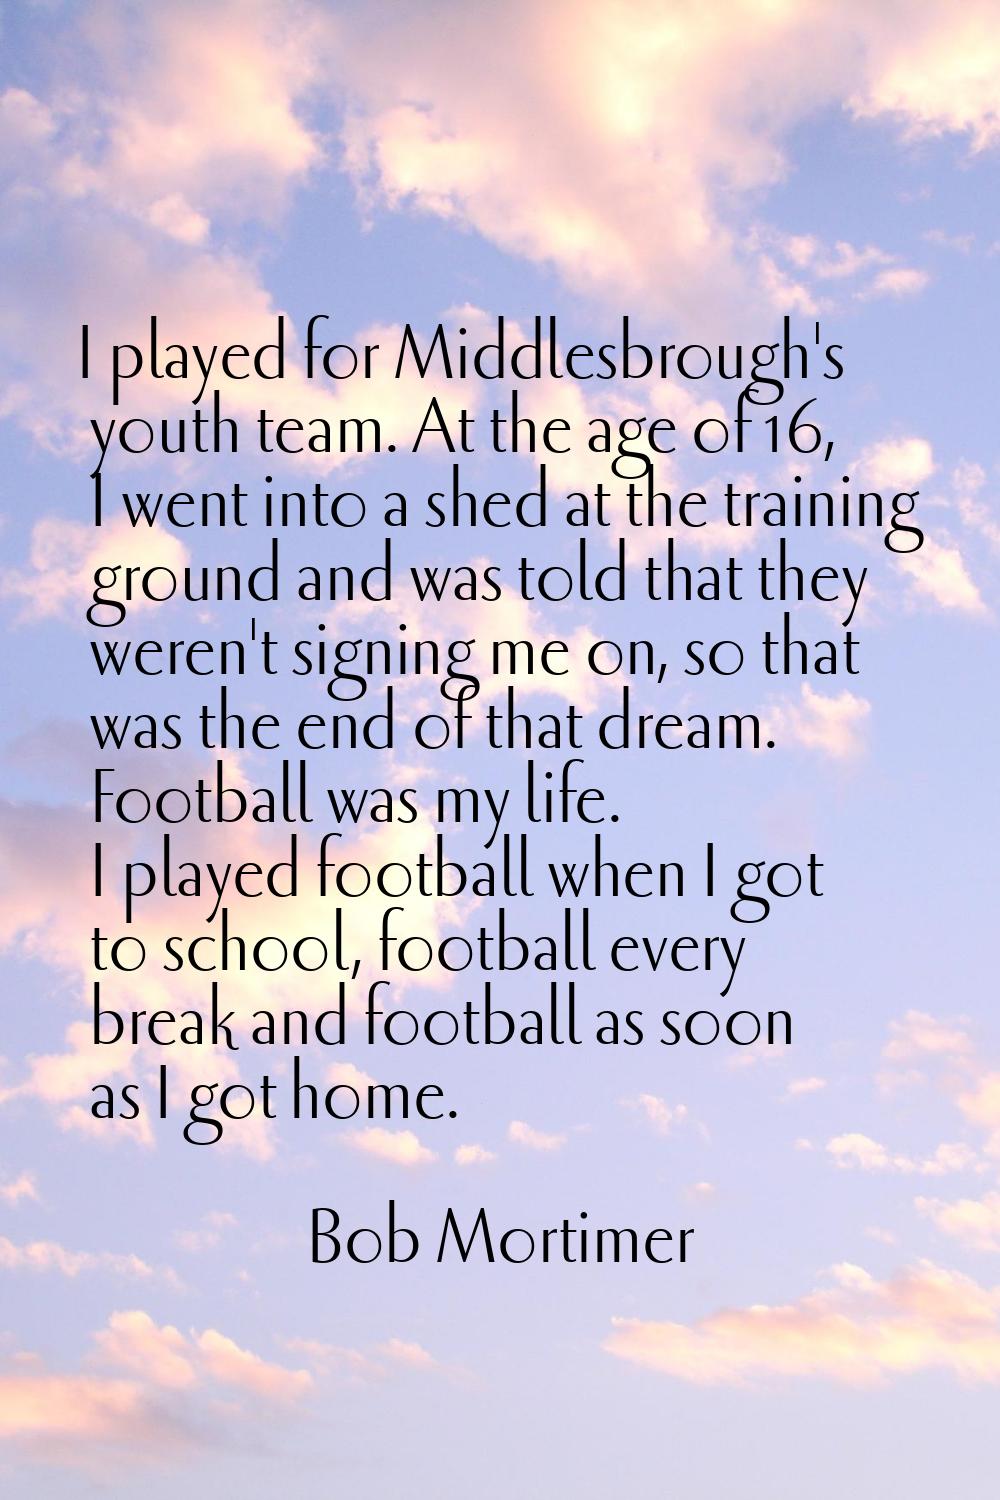 I played for Middlesbrough's youth team. At the age of 16, I went into a shed at the training groun